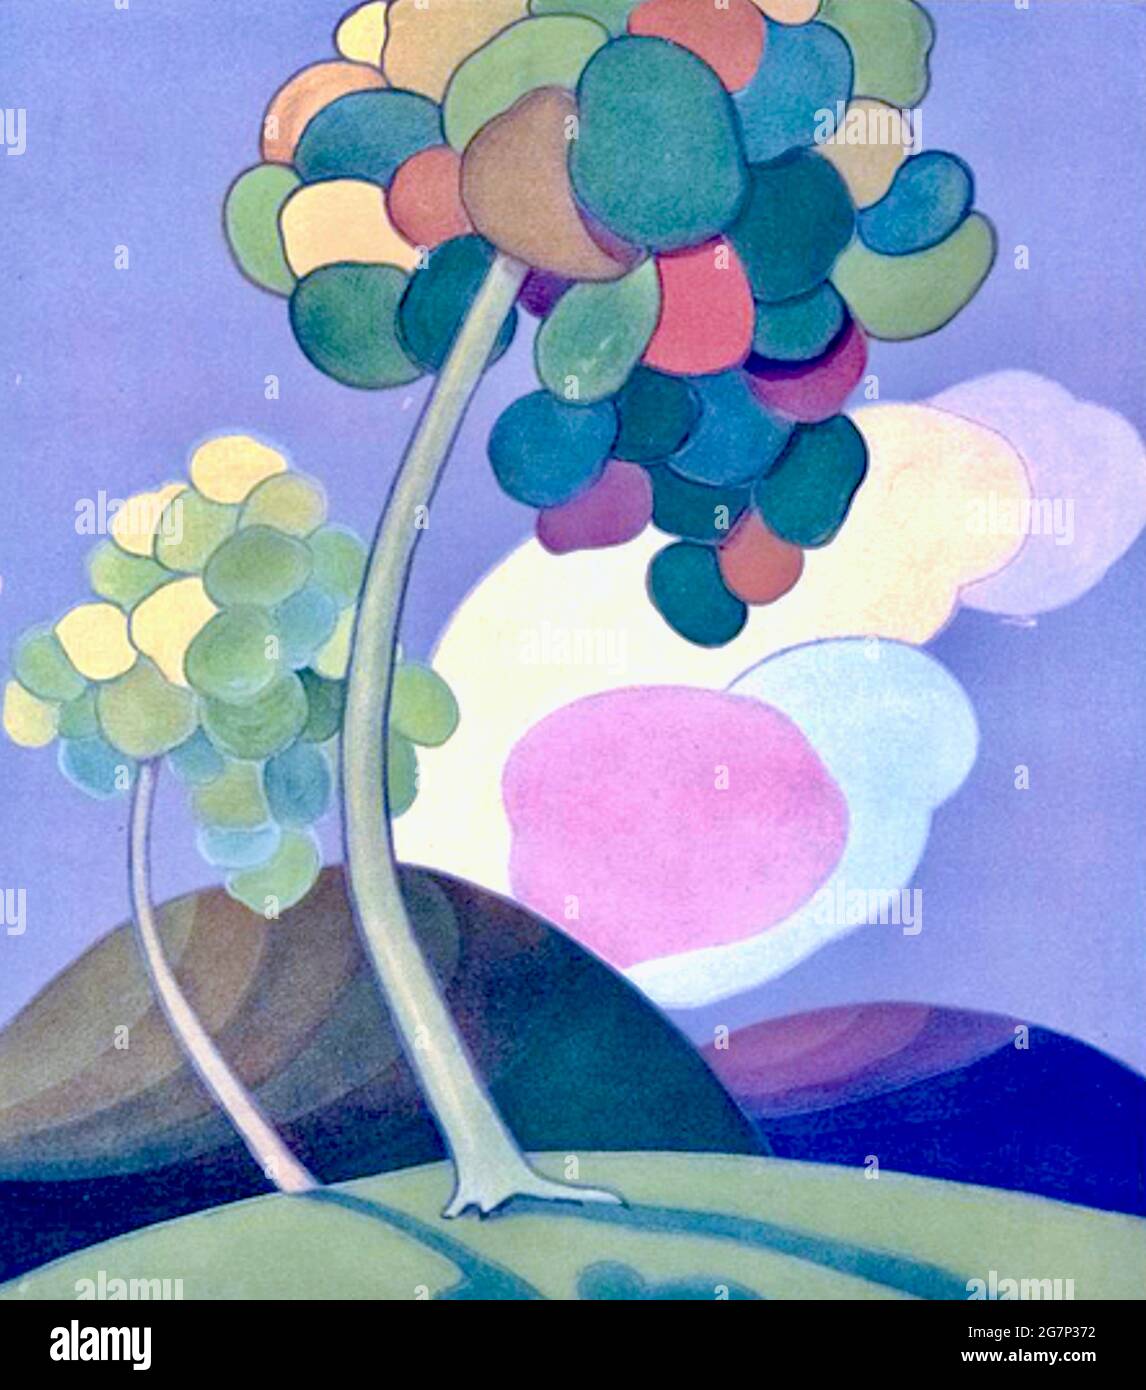 Classic Shadowland arts magazine cover from the 1920's. Artwork by     A. M. Hopfmuller. Balloon like trees - Trees like balloons. Stock Photo